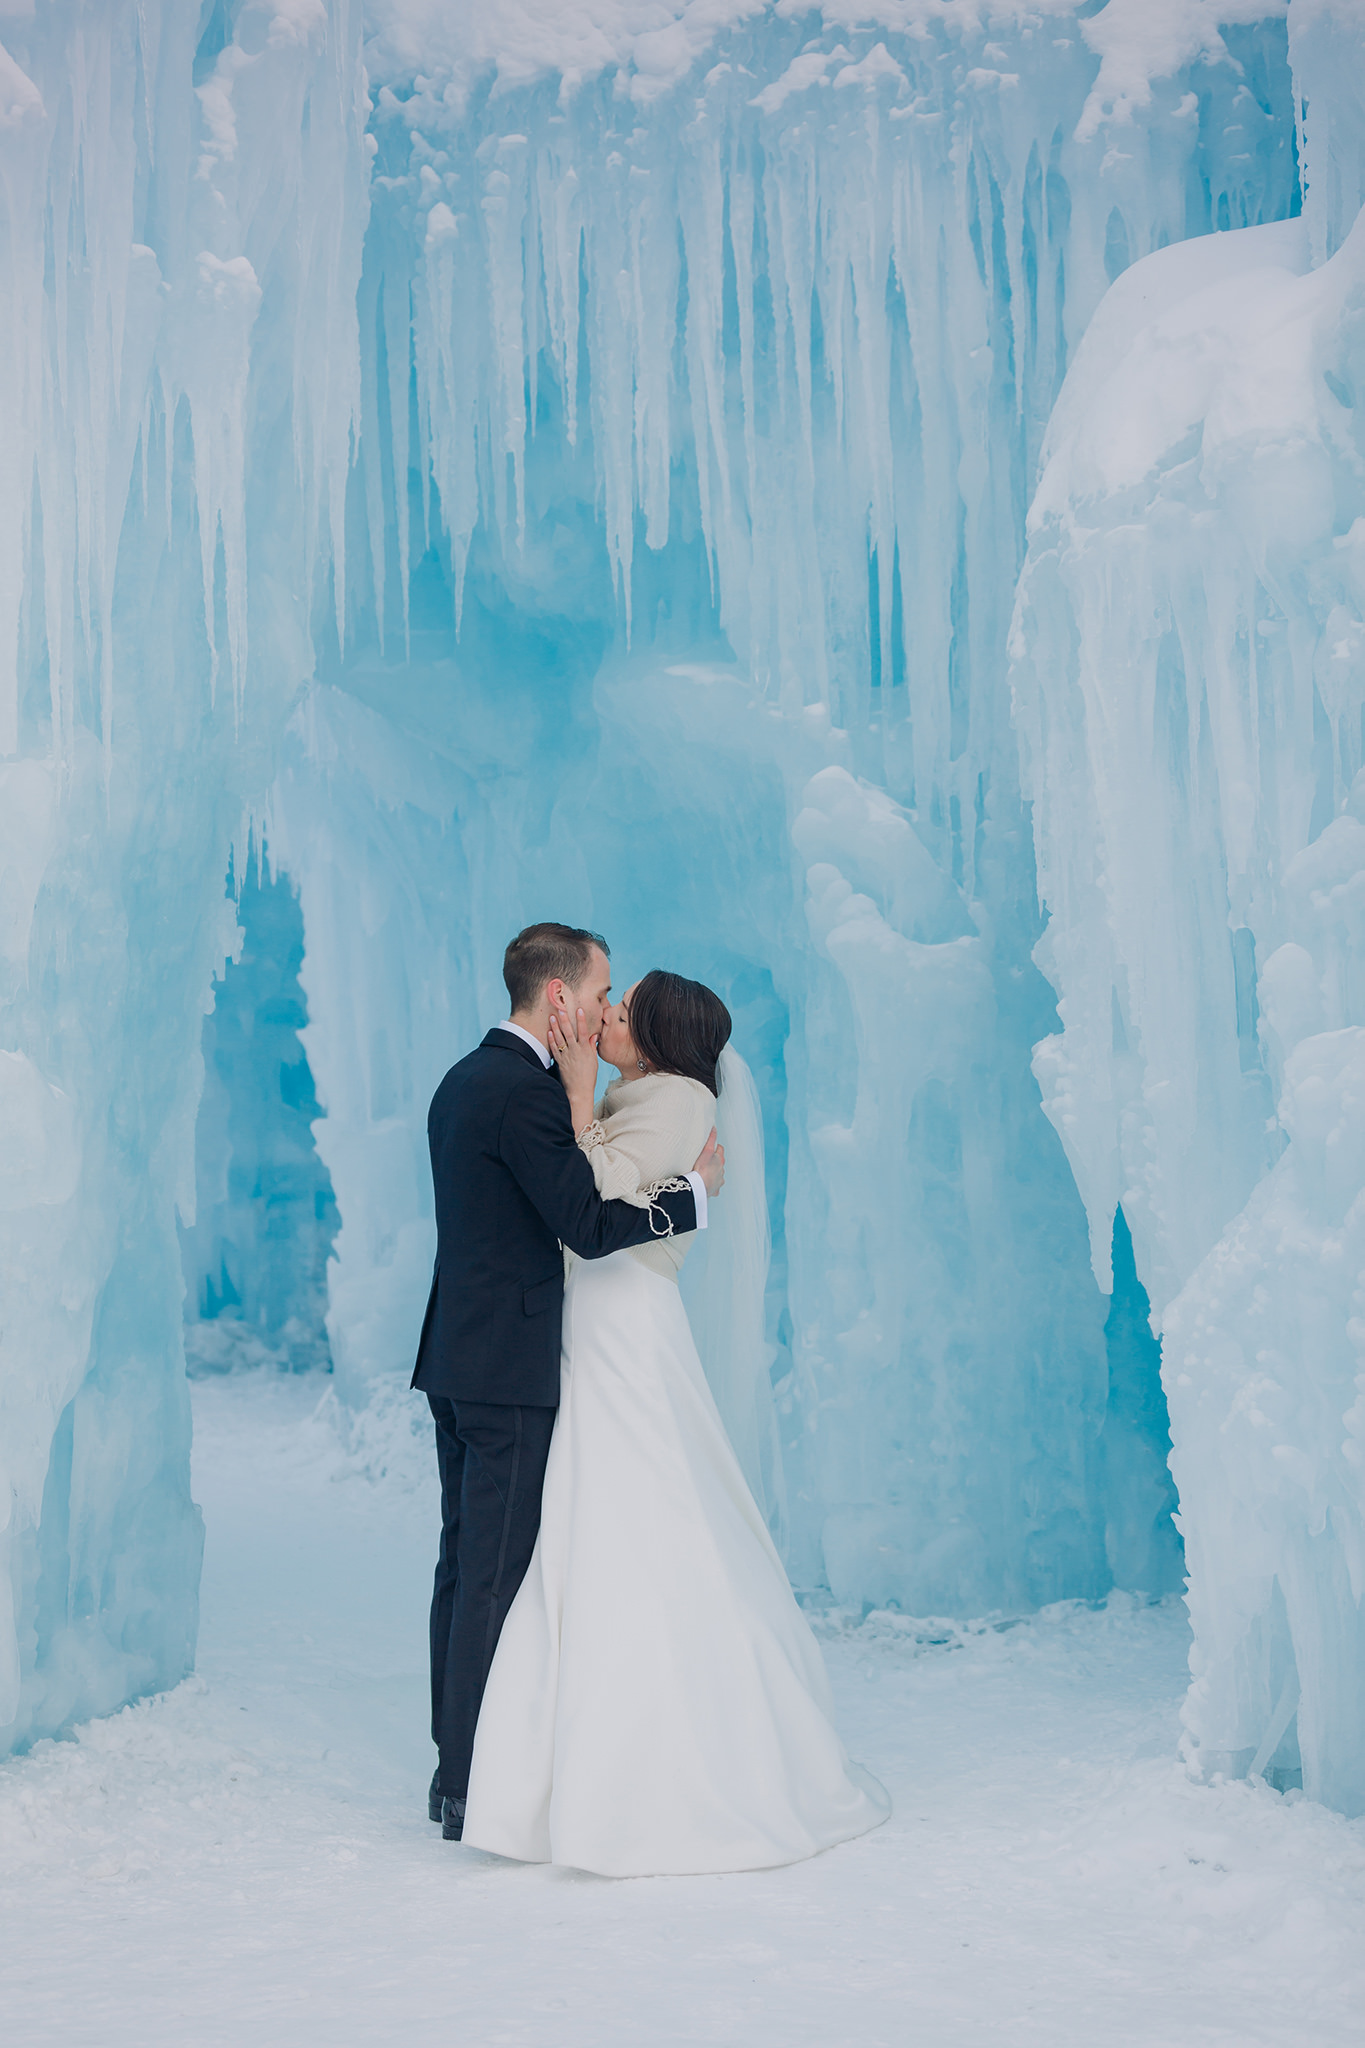 Edmonton Winter Wedding IceCastles portraits in man-made Ice Castle straight out of Frozen photographed by ENV Photography